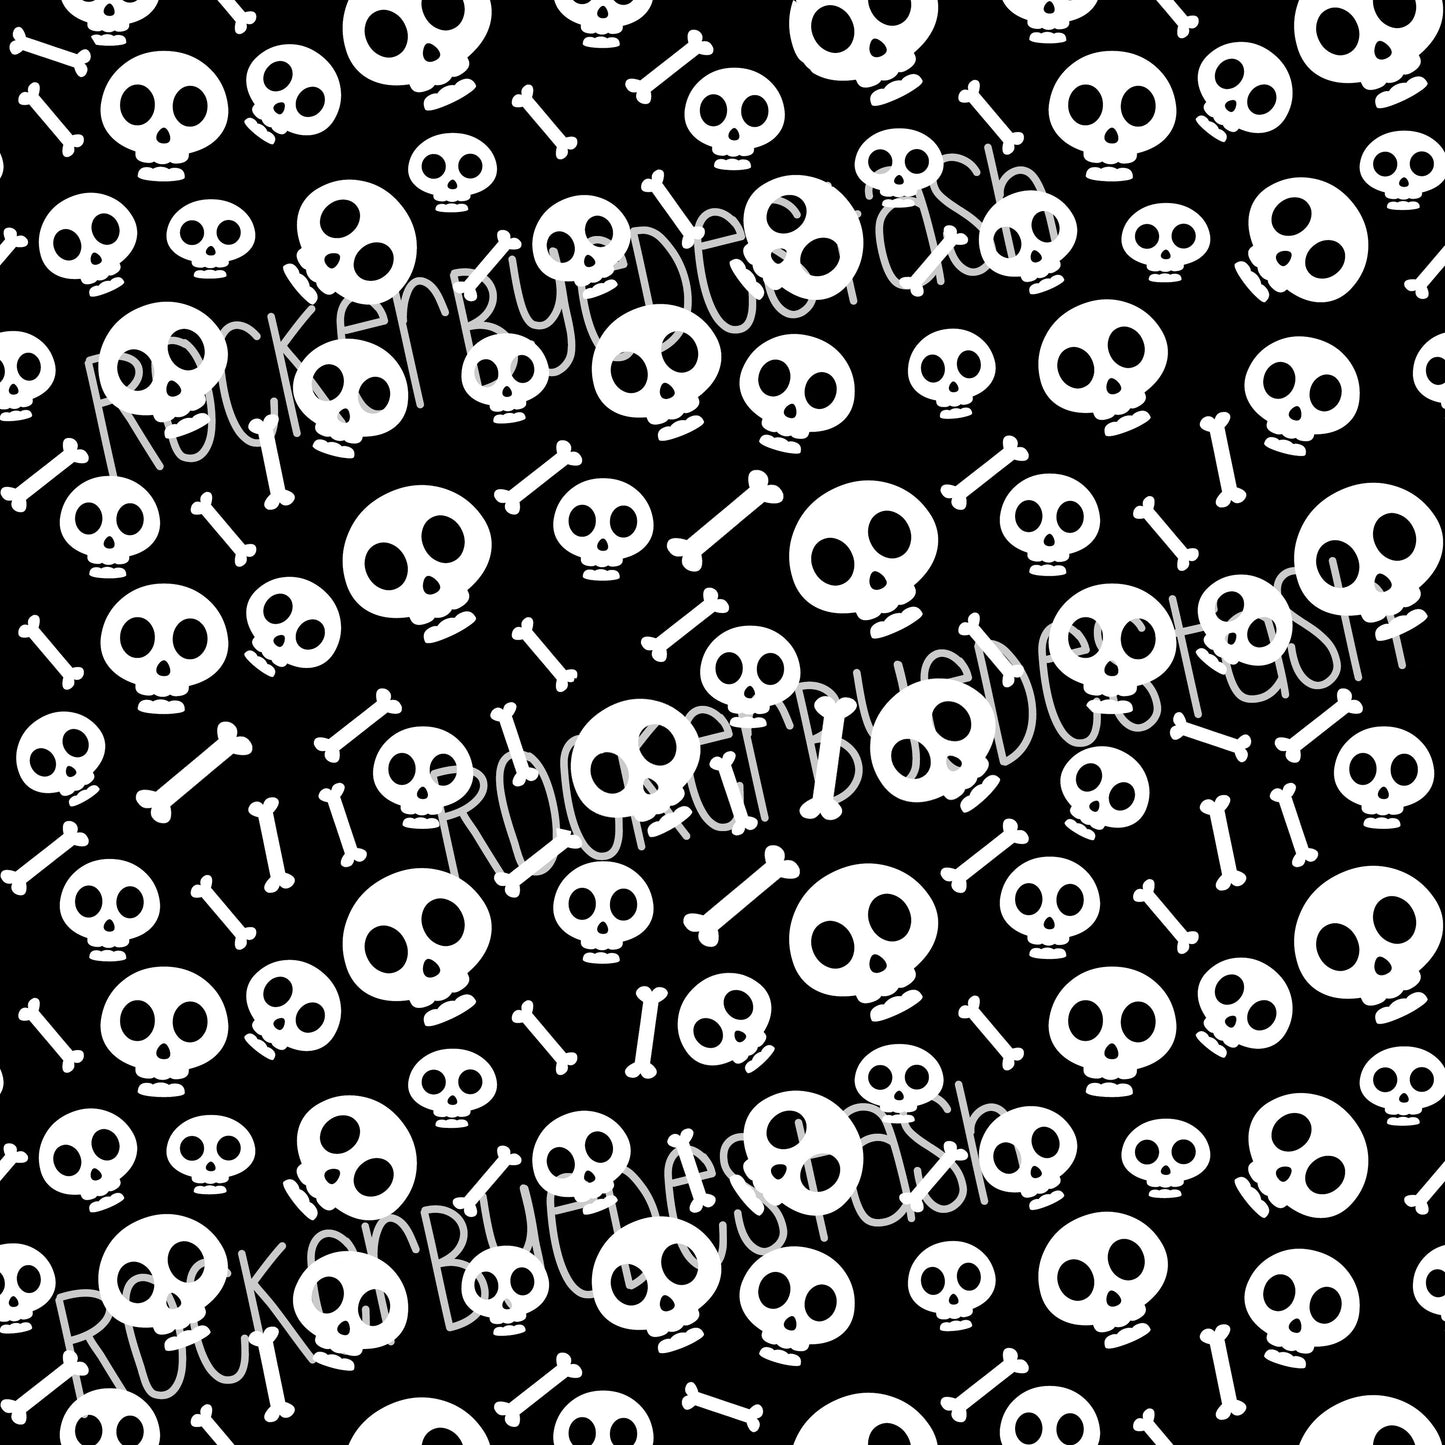 RETAIL Bamboo Lycra ACCENT print - 1 yard per quantity Coordinate designs bamboo lycra Black and white